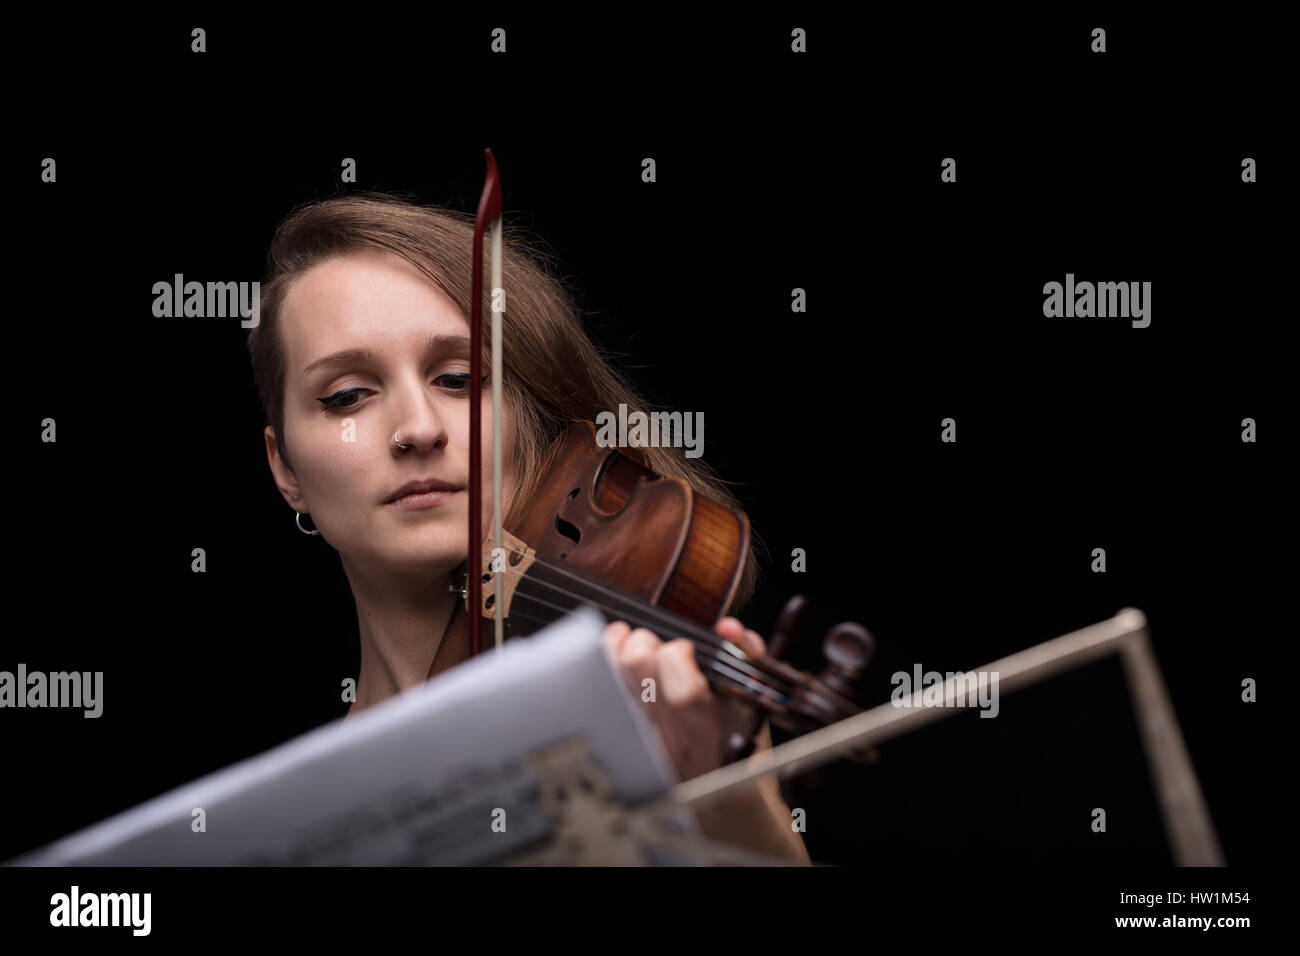 Young beautiful woman violinist player playing her instrument on her shoulder holding bow. portrait in a blurred dark room in background. Concept of c Stock Photo